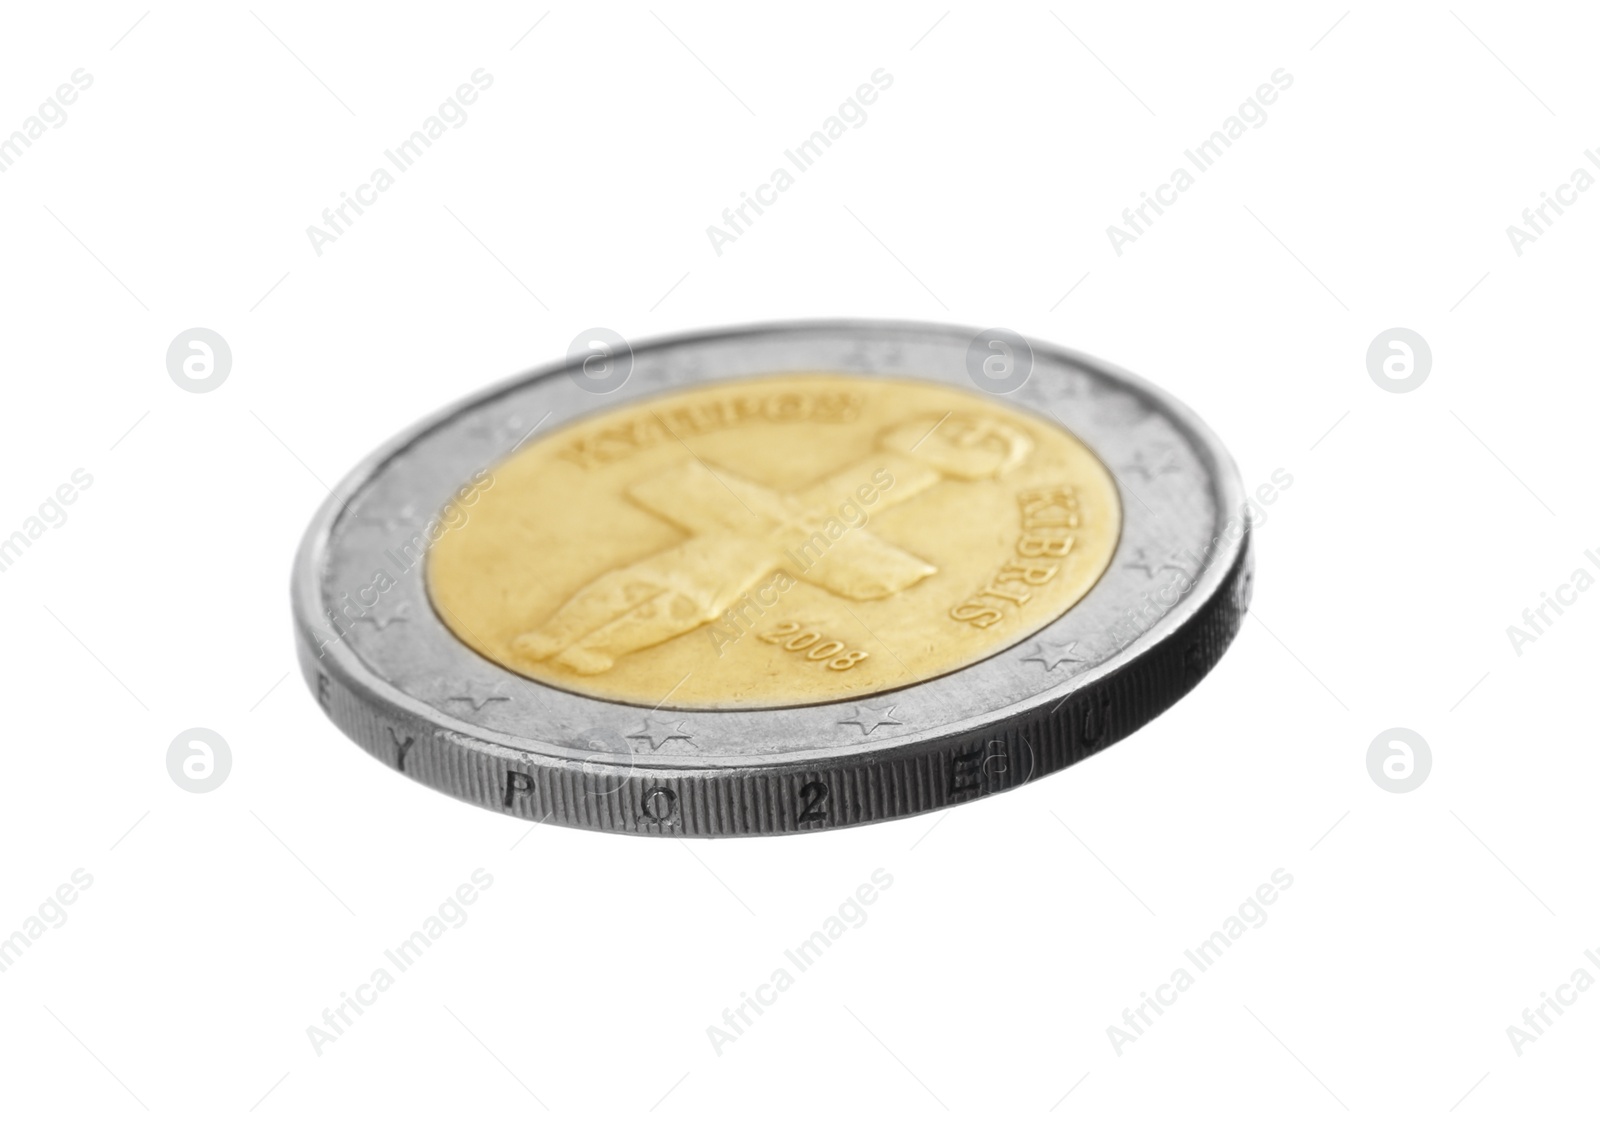 Photo of European two cent coin isolated on white